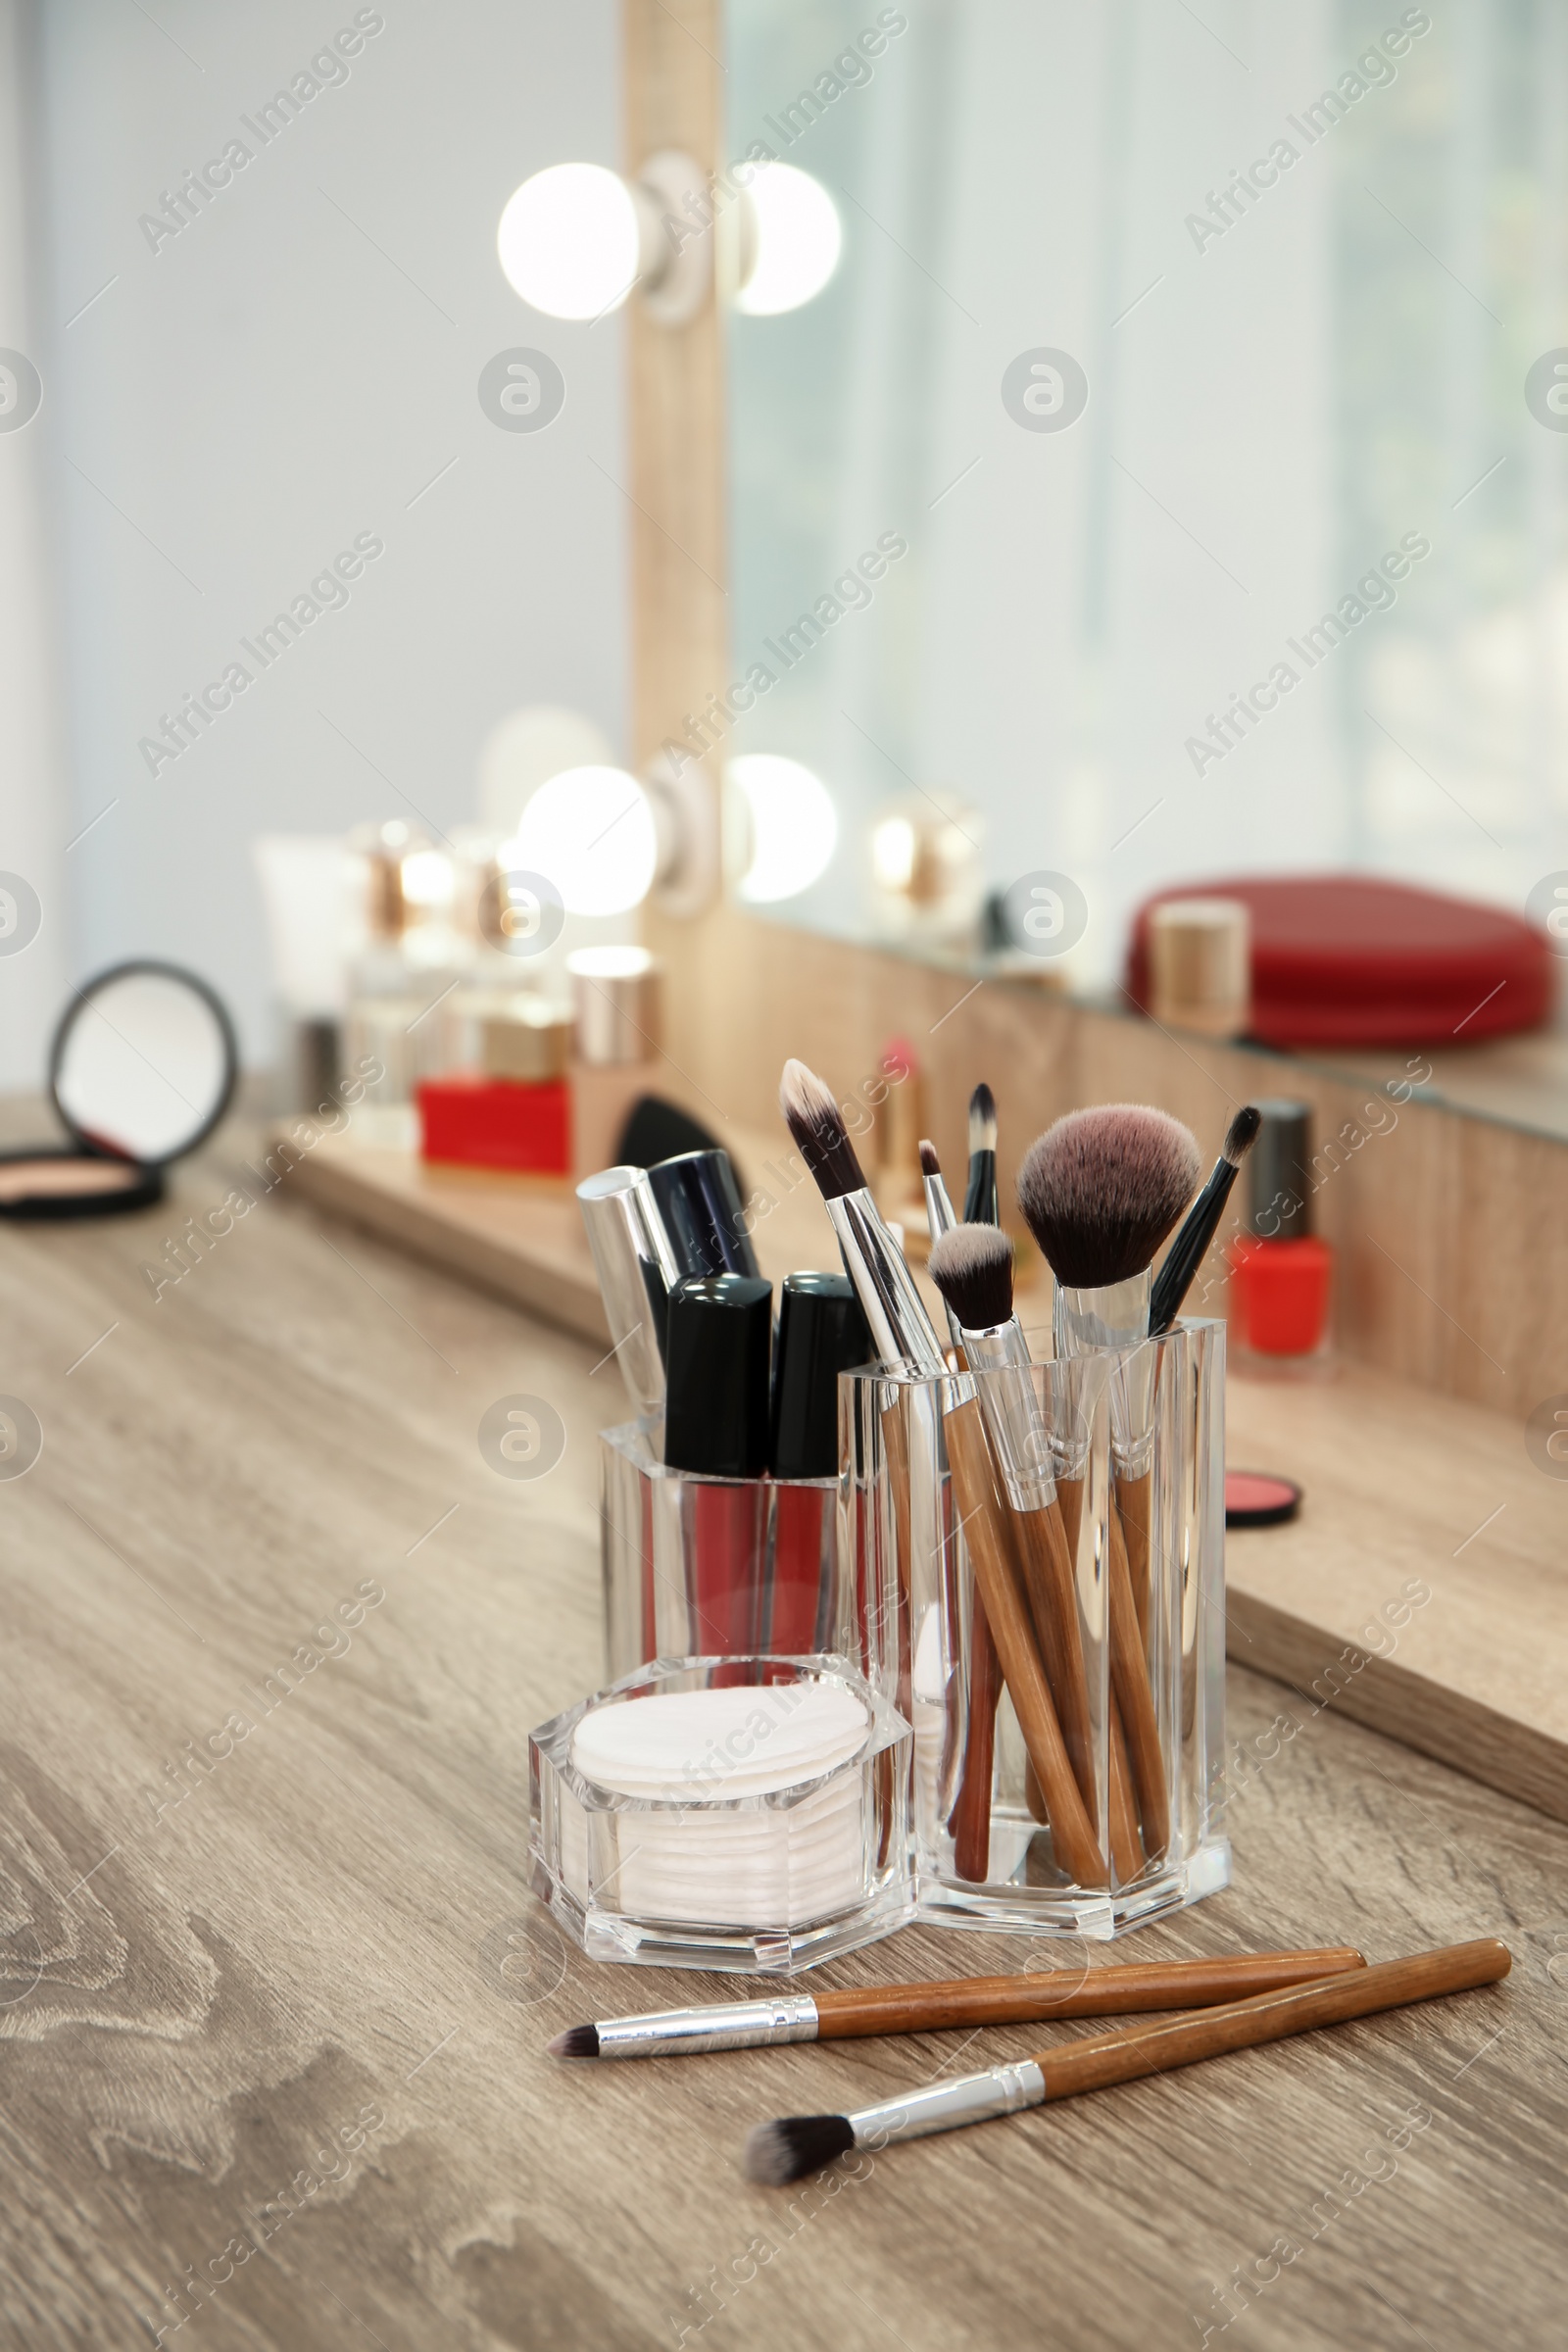 Photo of Makeup cosmetic products and tools on dressing table